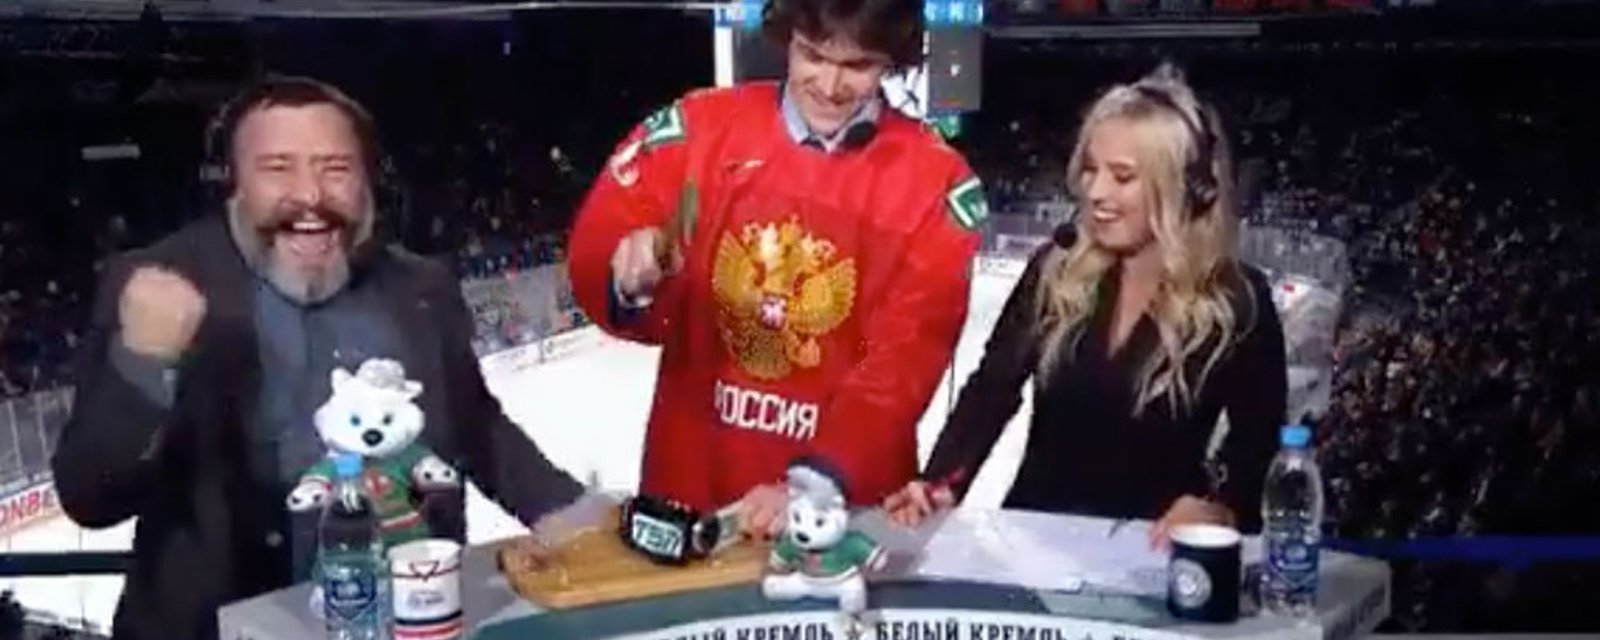 Russian junior player Voronkov smashes a “TSN” camera with a hammer during KHL intermission